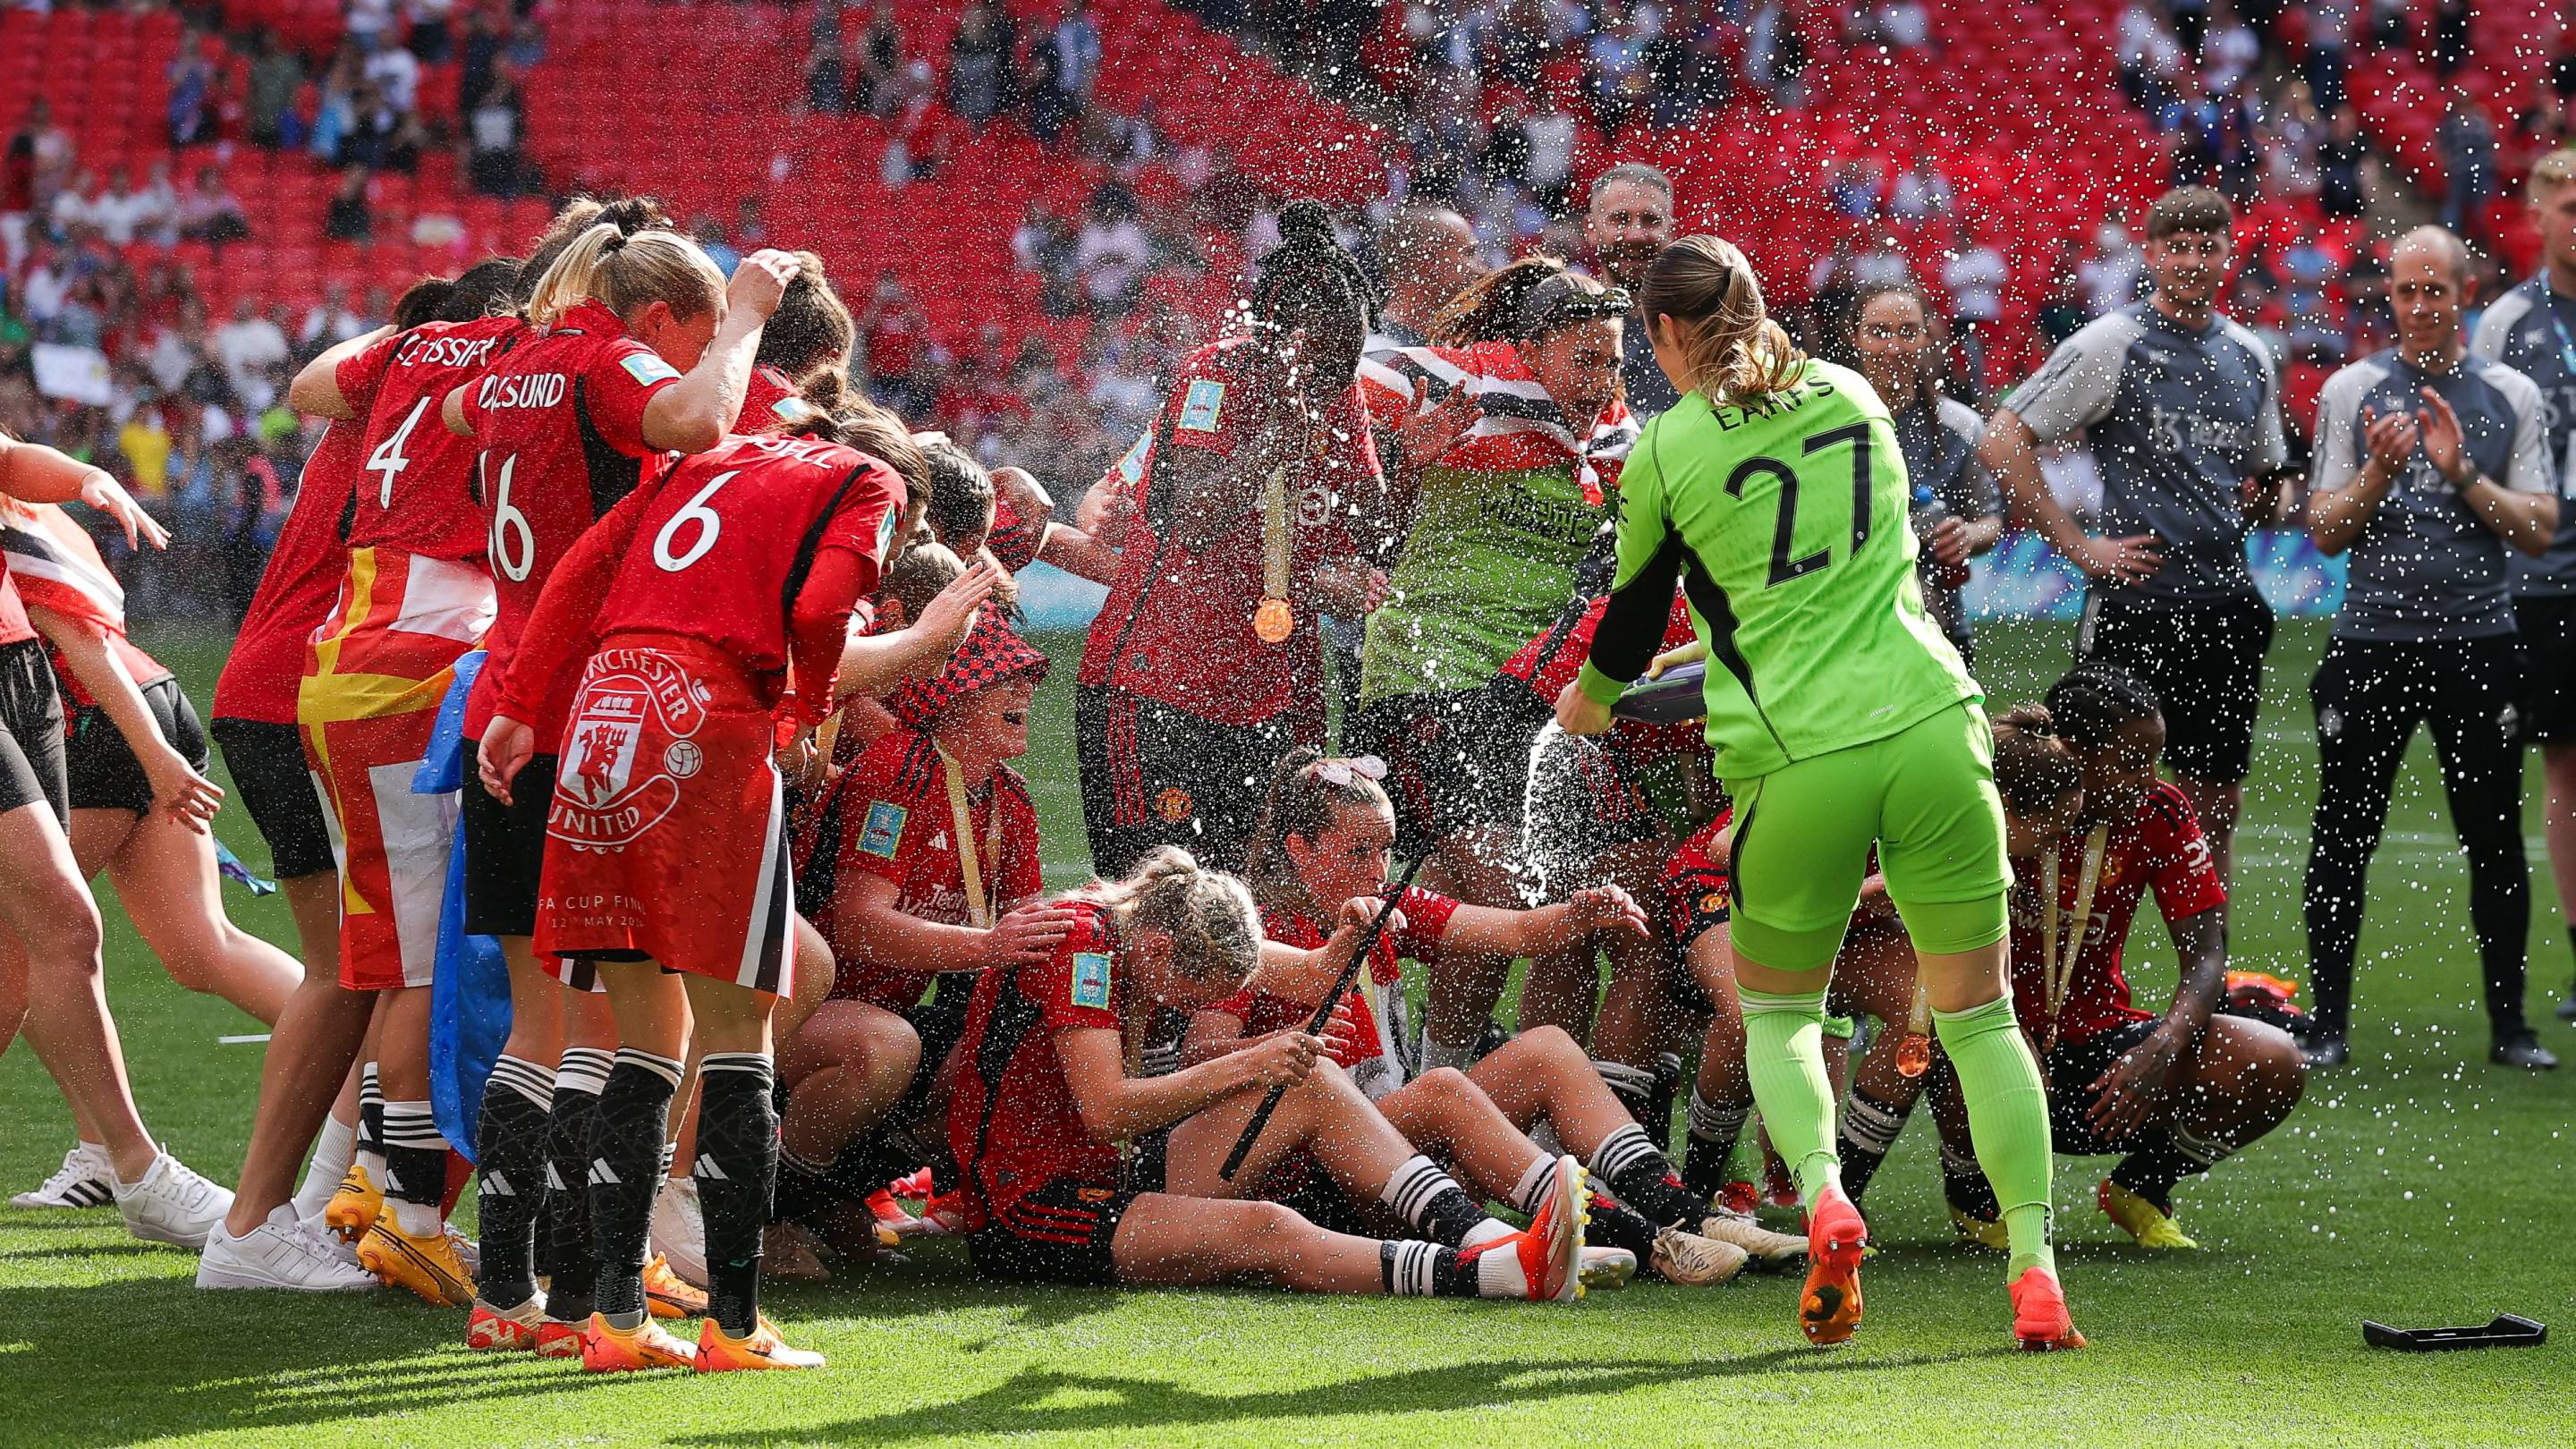 'Champagne going everywhere' - Man Utd players react to Women's FA Cup win